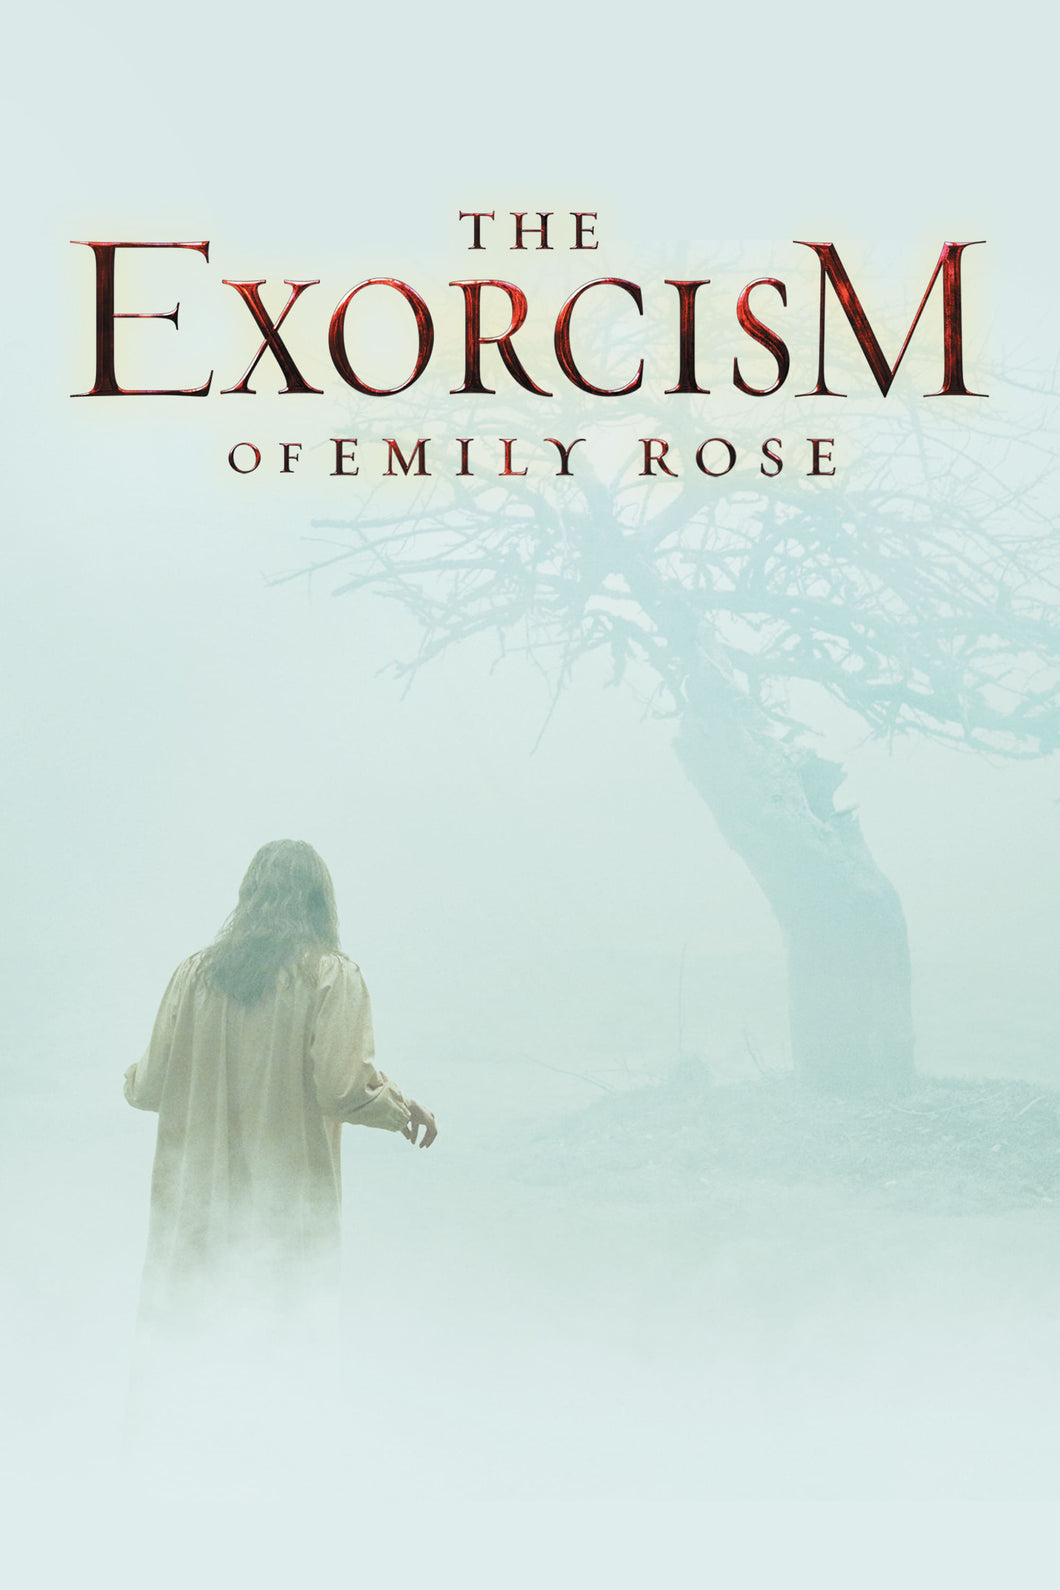 The Exorcism of Emily Rose (2005) Movie Poster High Quality Glossy Paper A1 A2 A3 A4 A3 Framed or Unframed!!!